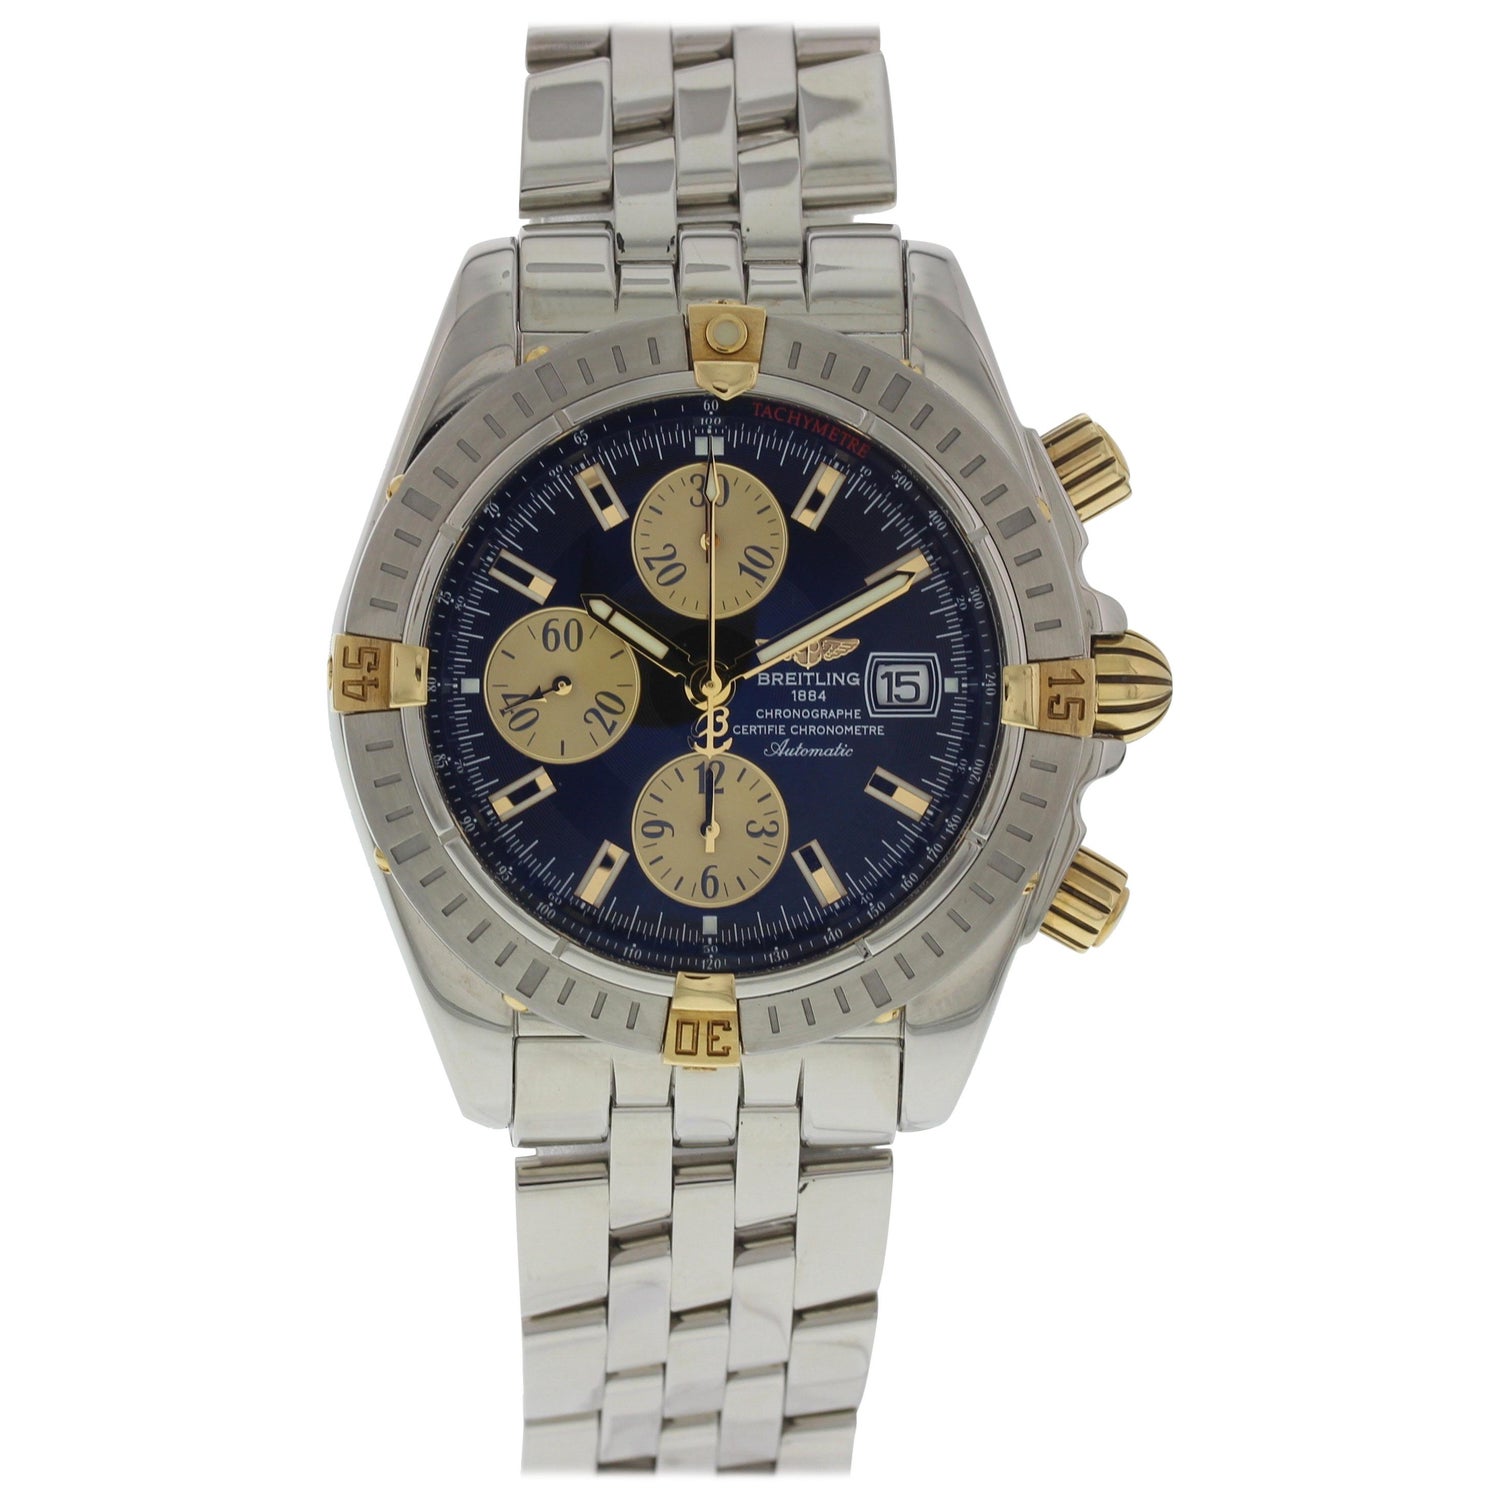 Breitling B13356 - For Sale on 1stDibs | breitling b13356 price, breitling  1884 chronometre certifie b13356 price, breitling 1884 b13356 price